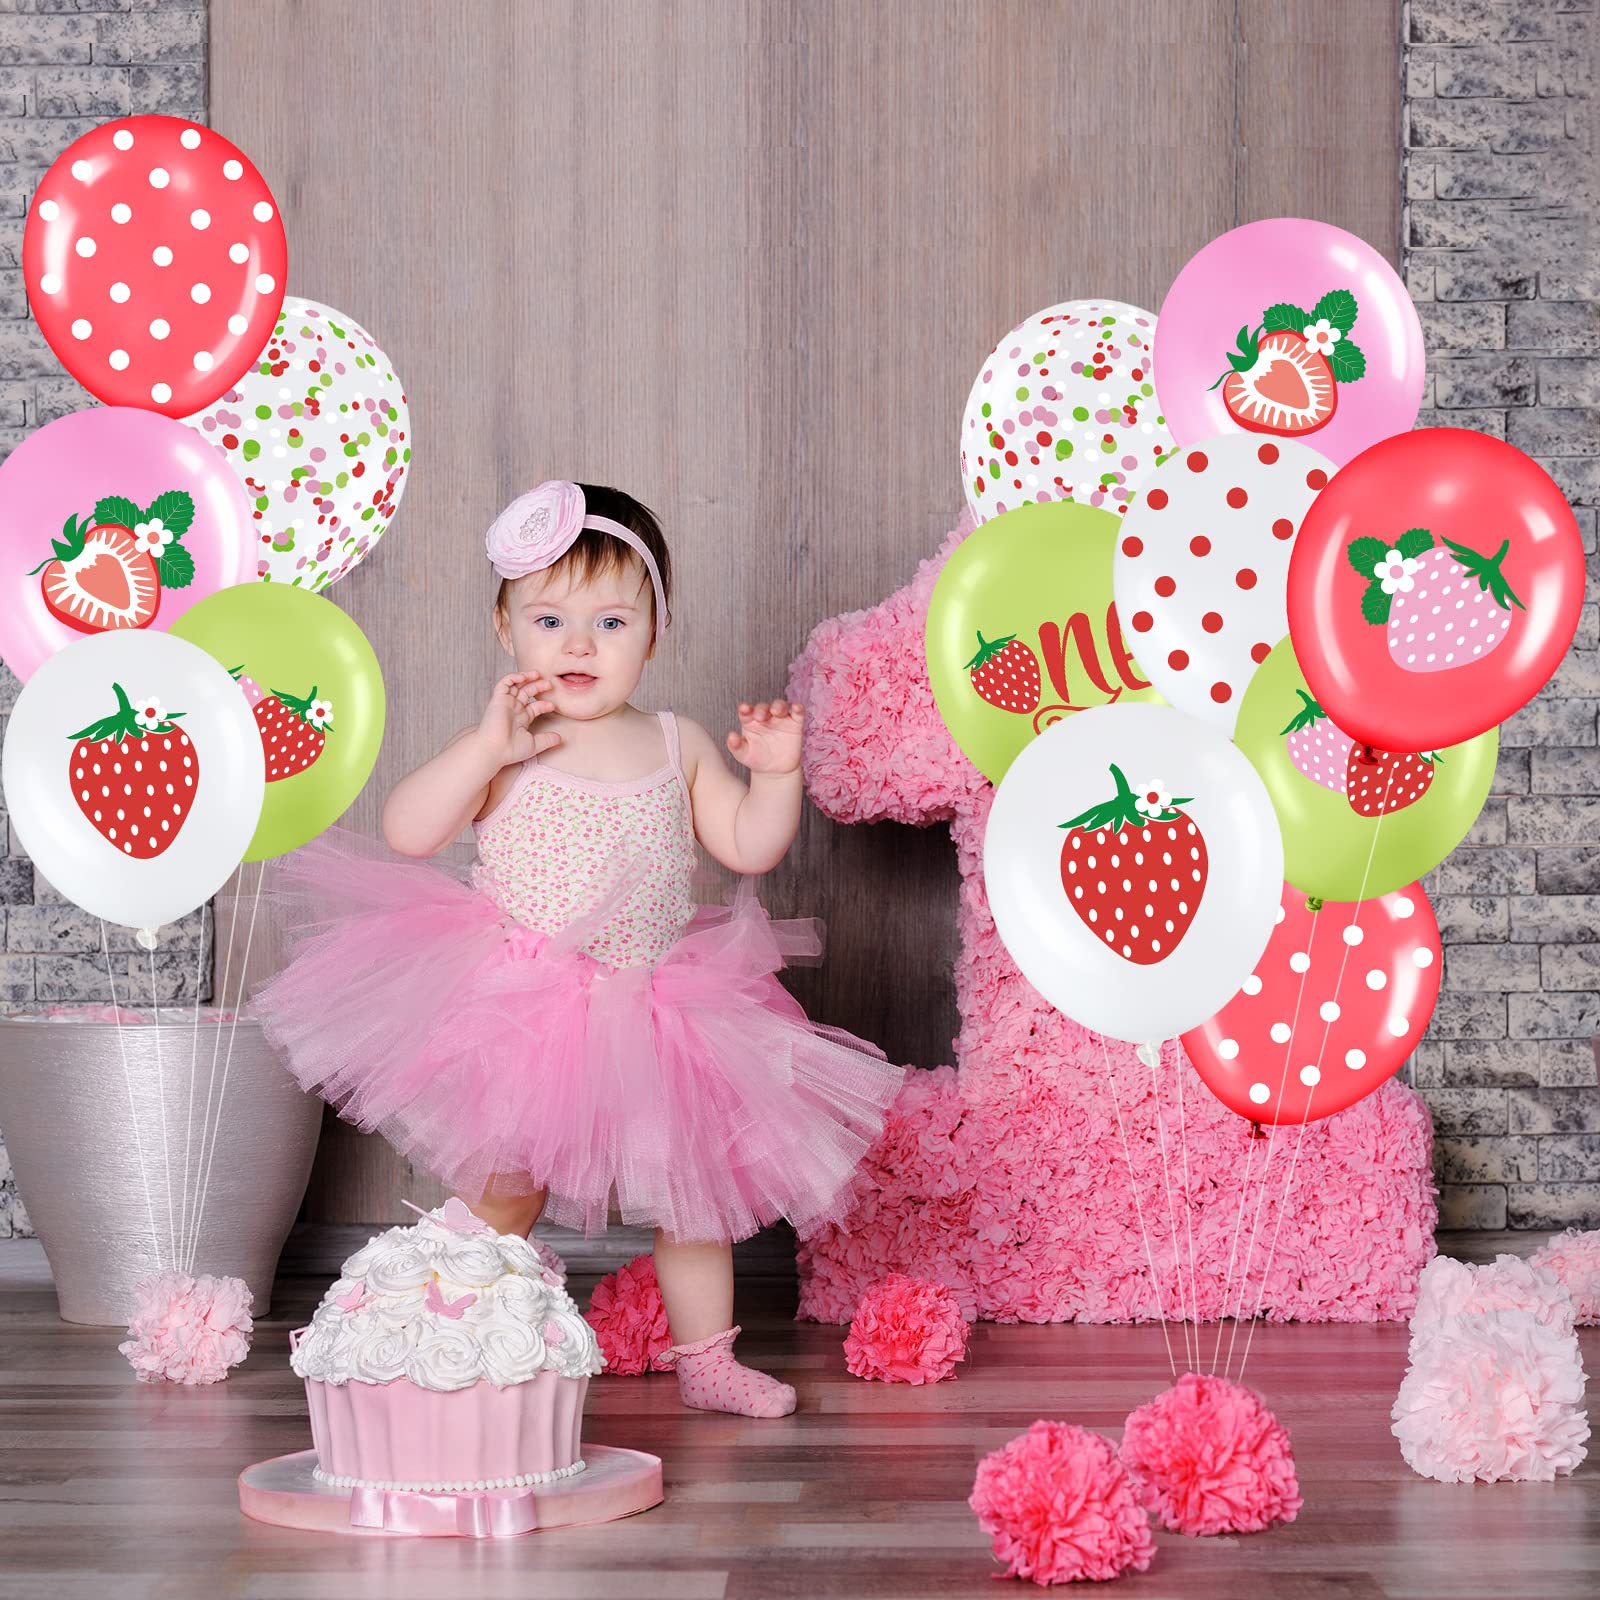 36 Pcs Strawberry Theme Balloons Strawberry Sweet One Party Balloons Bouquet Strawberry Party Decorations for Girls First Birthday Party Summer Fruit Party Baby Shower Supplies, 12 Inch